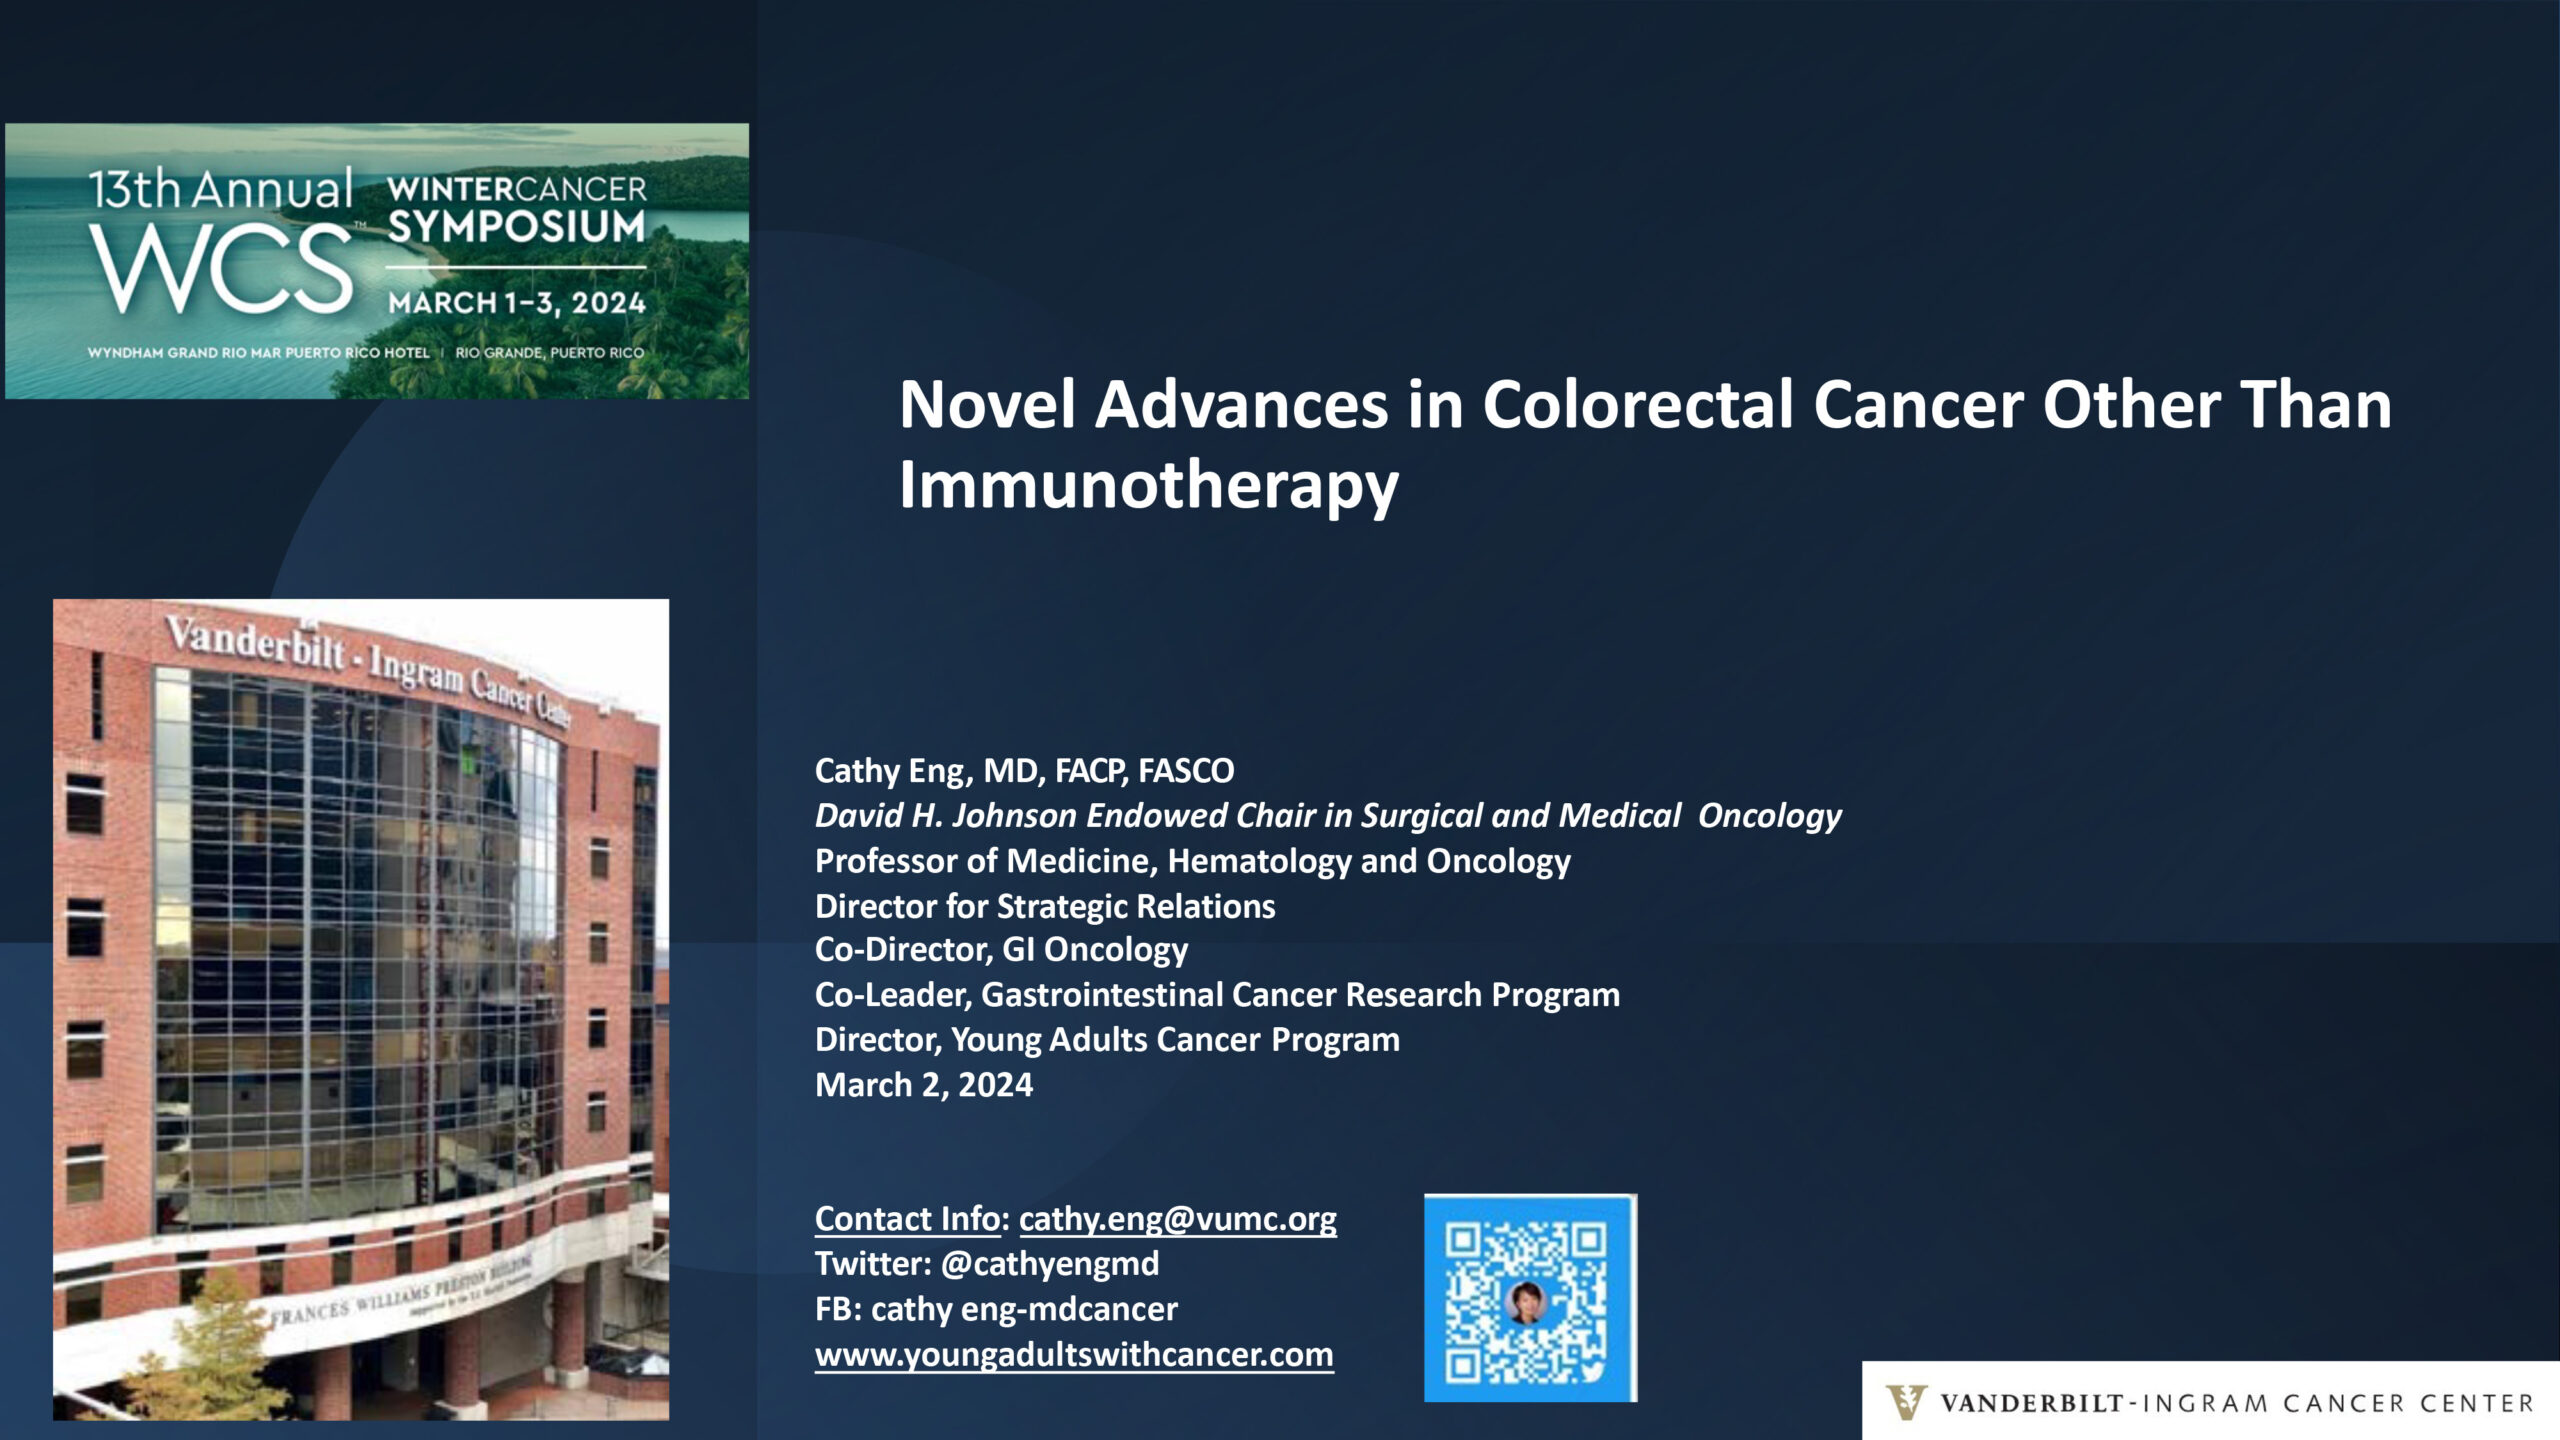 Novel Advances in Colorectal Cancer Other Than Immunotherapy